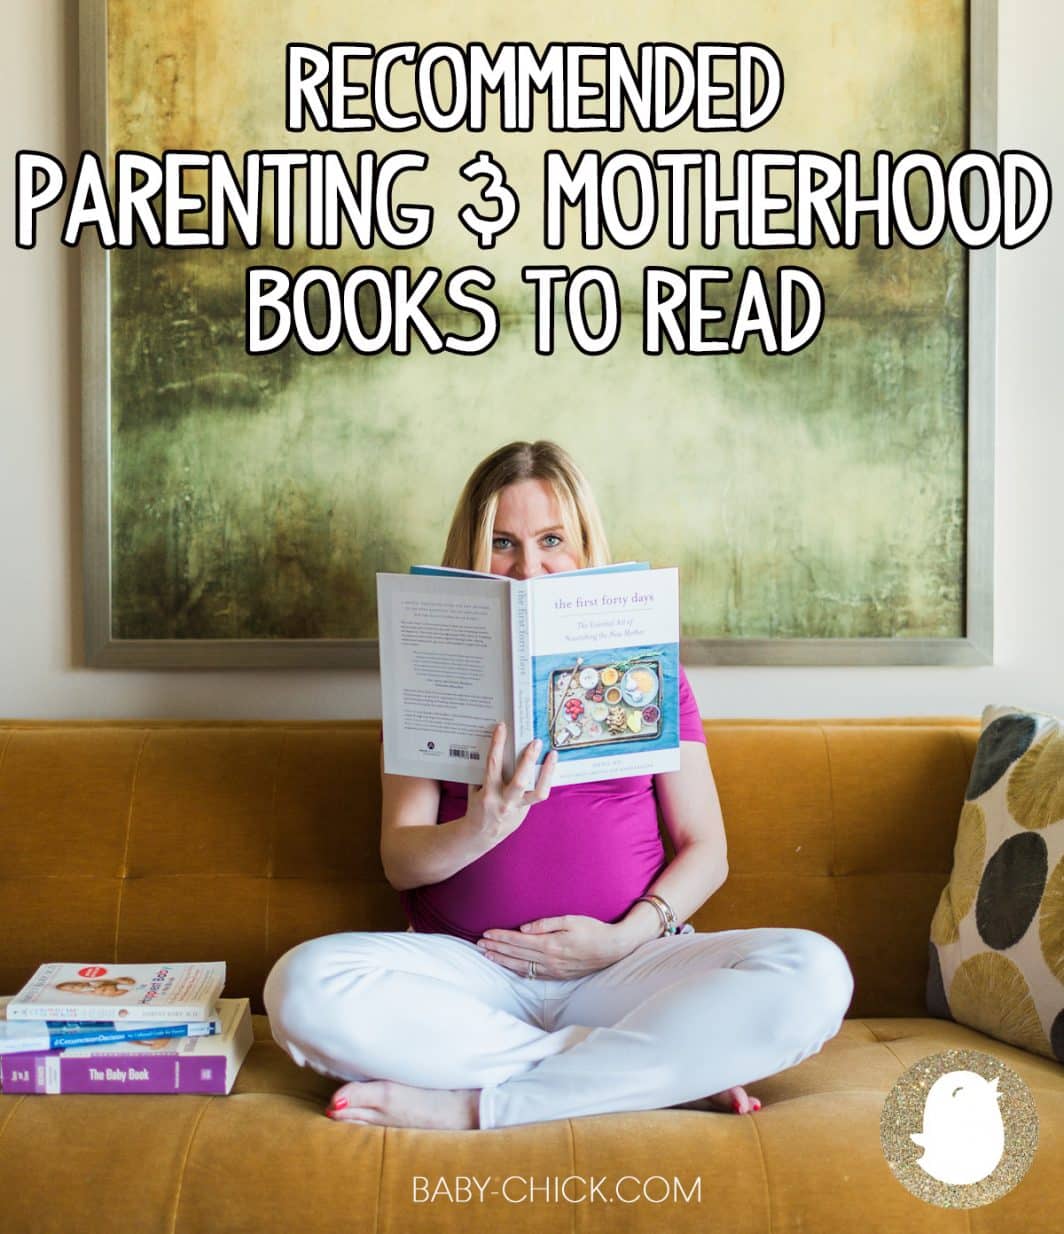 Recommended parenting and motherhood books to read.